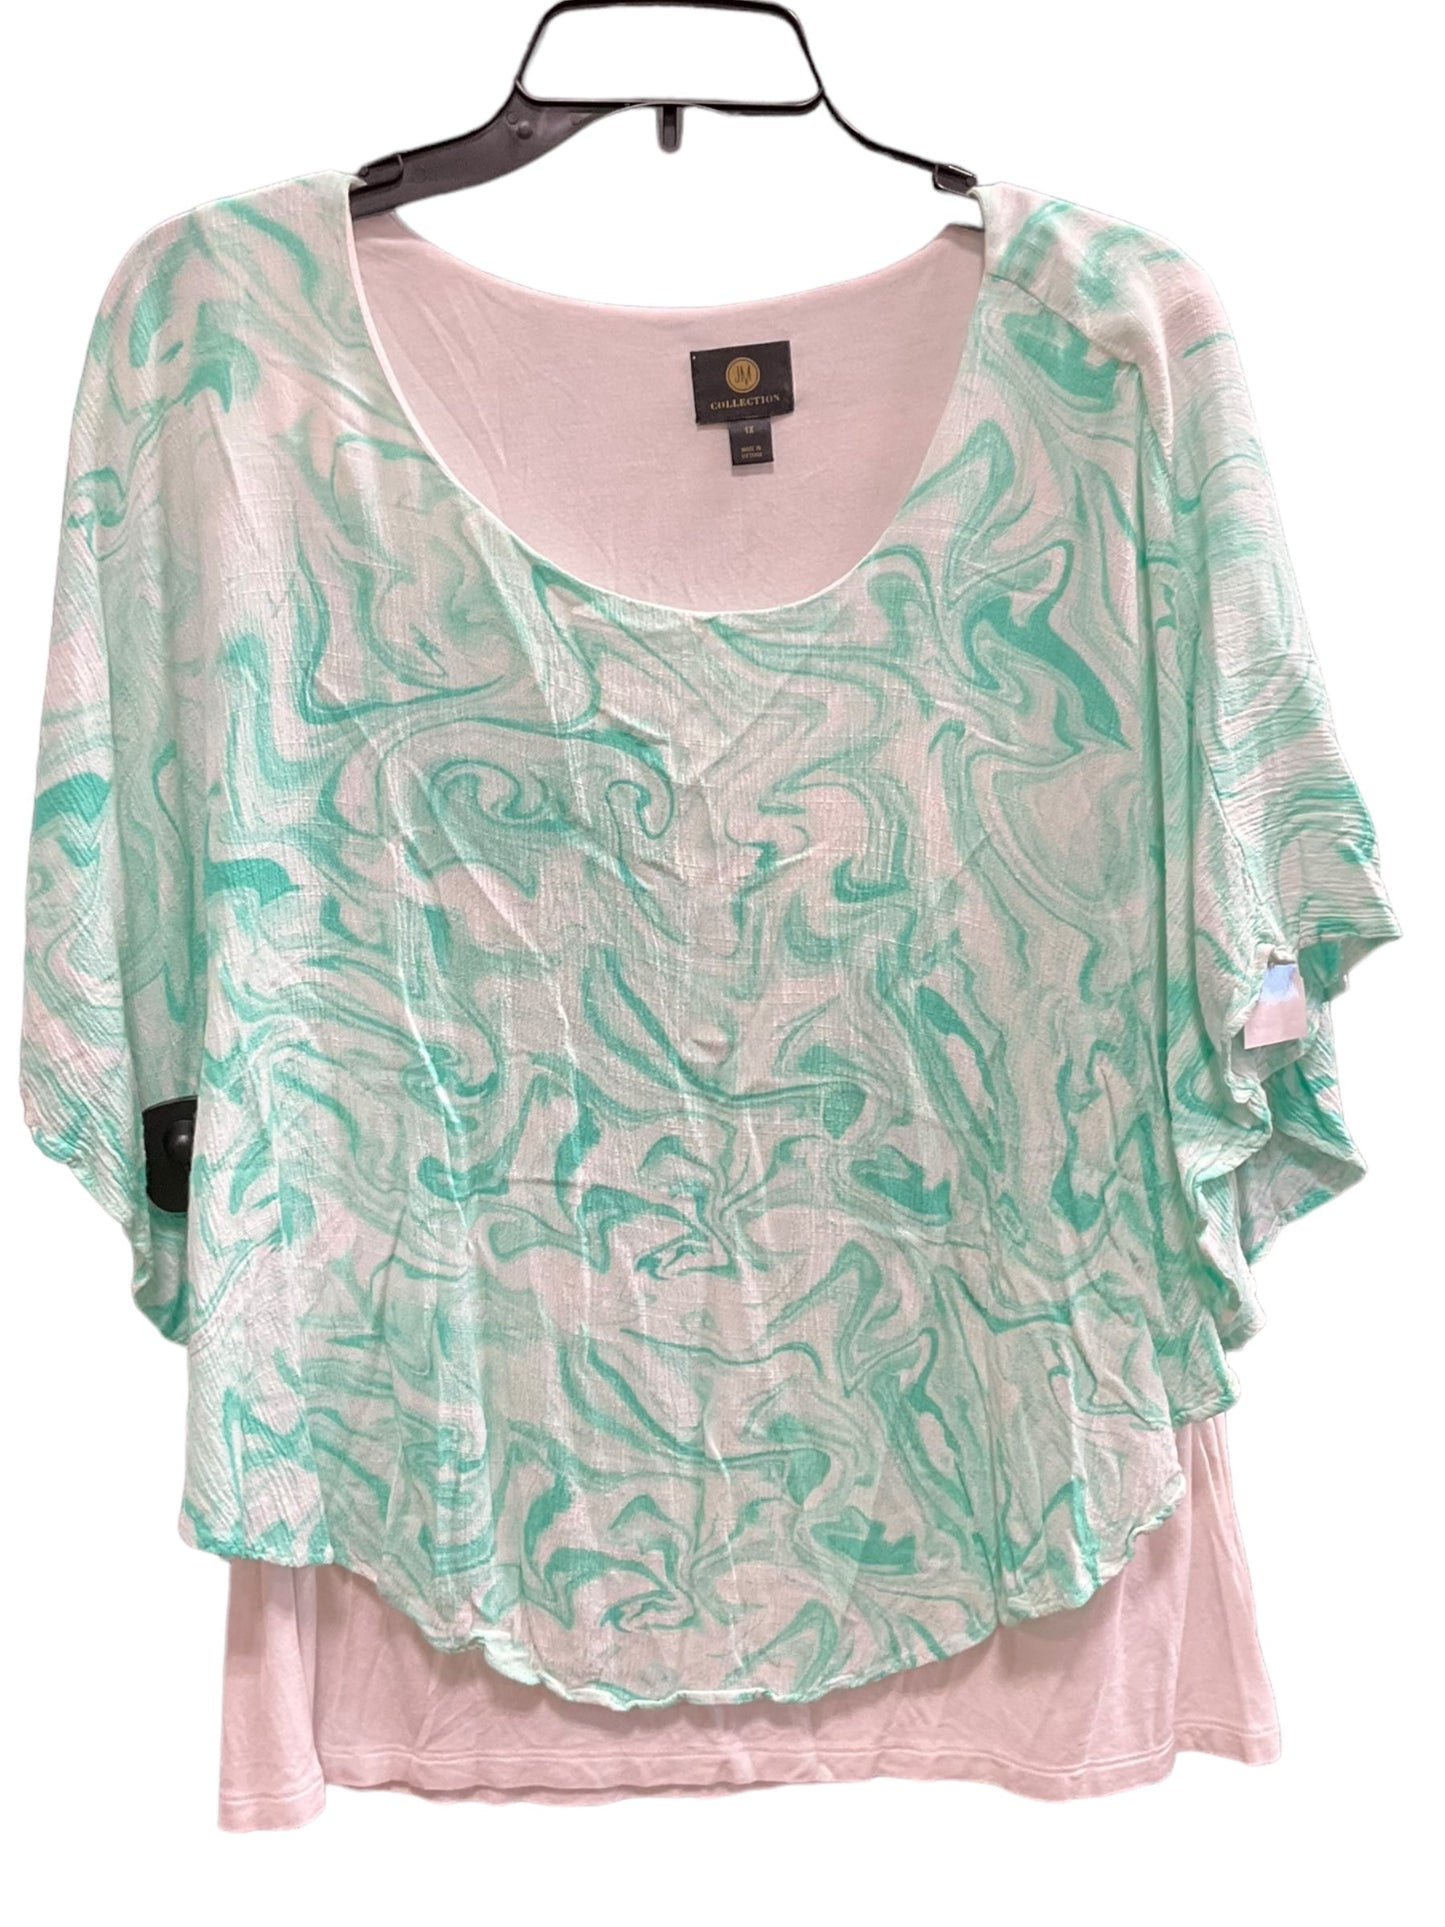 Green & White Top Short Sleeve Jm Collections, Size 1x